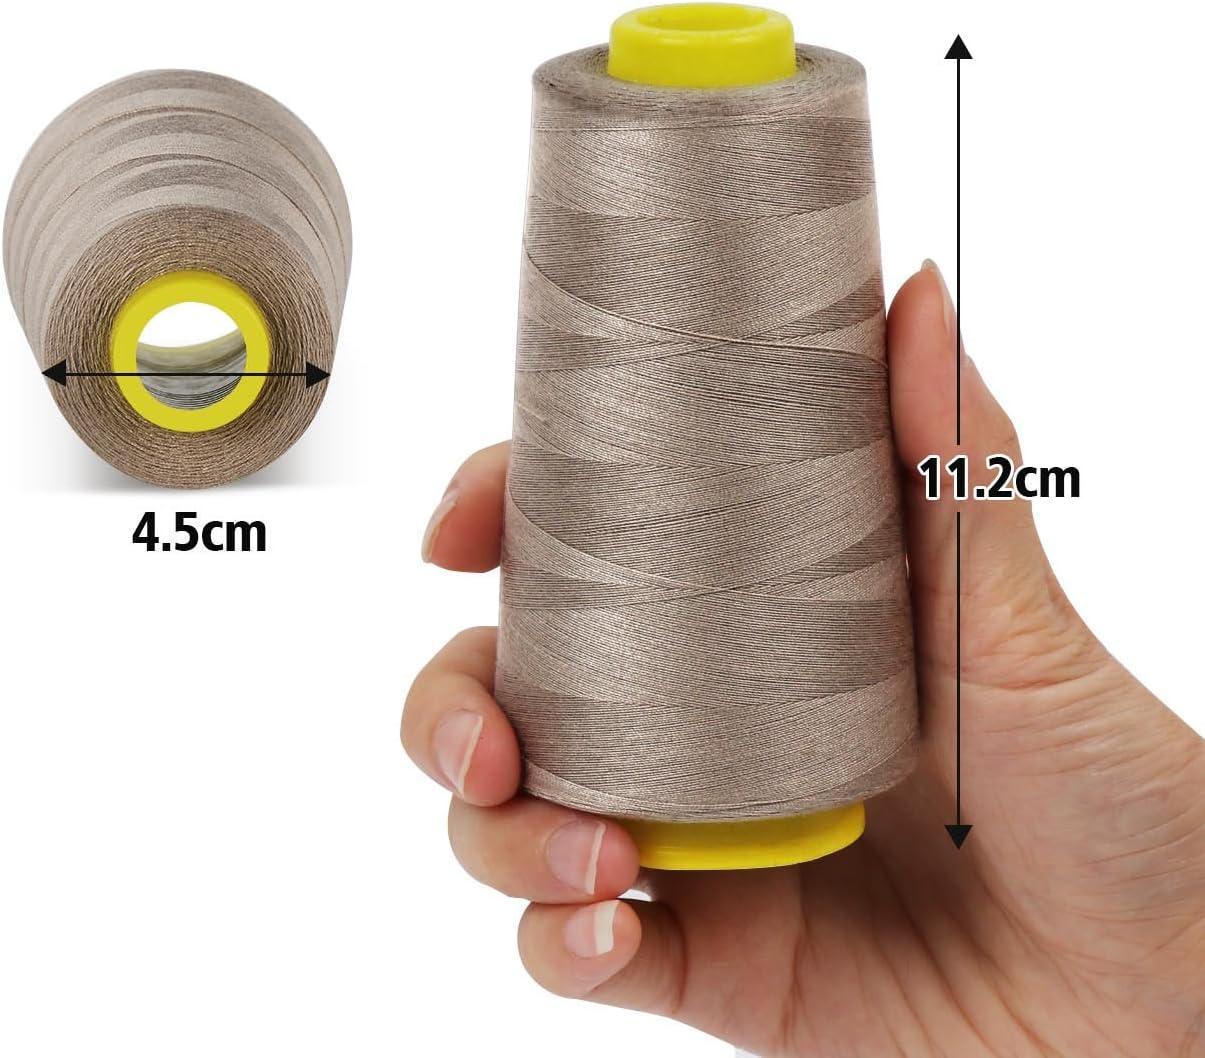 Iopqo Knitting Kit Sewing Threads Polyester 3000Yards per Spools for Hand & Machine Sewing Knitting Needles, Size: Medium